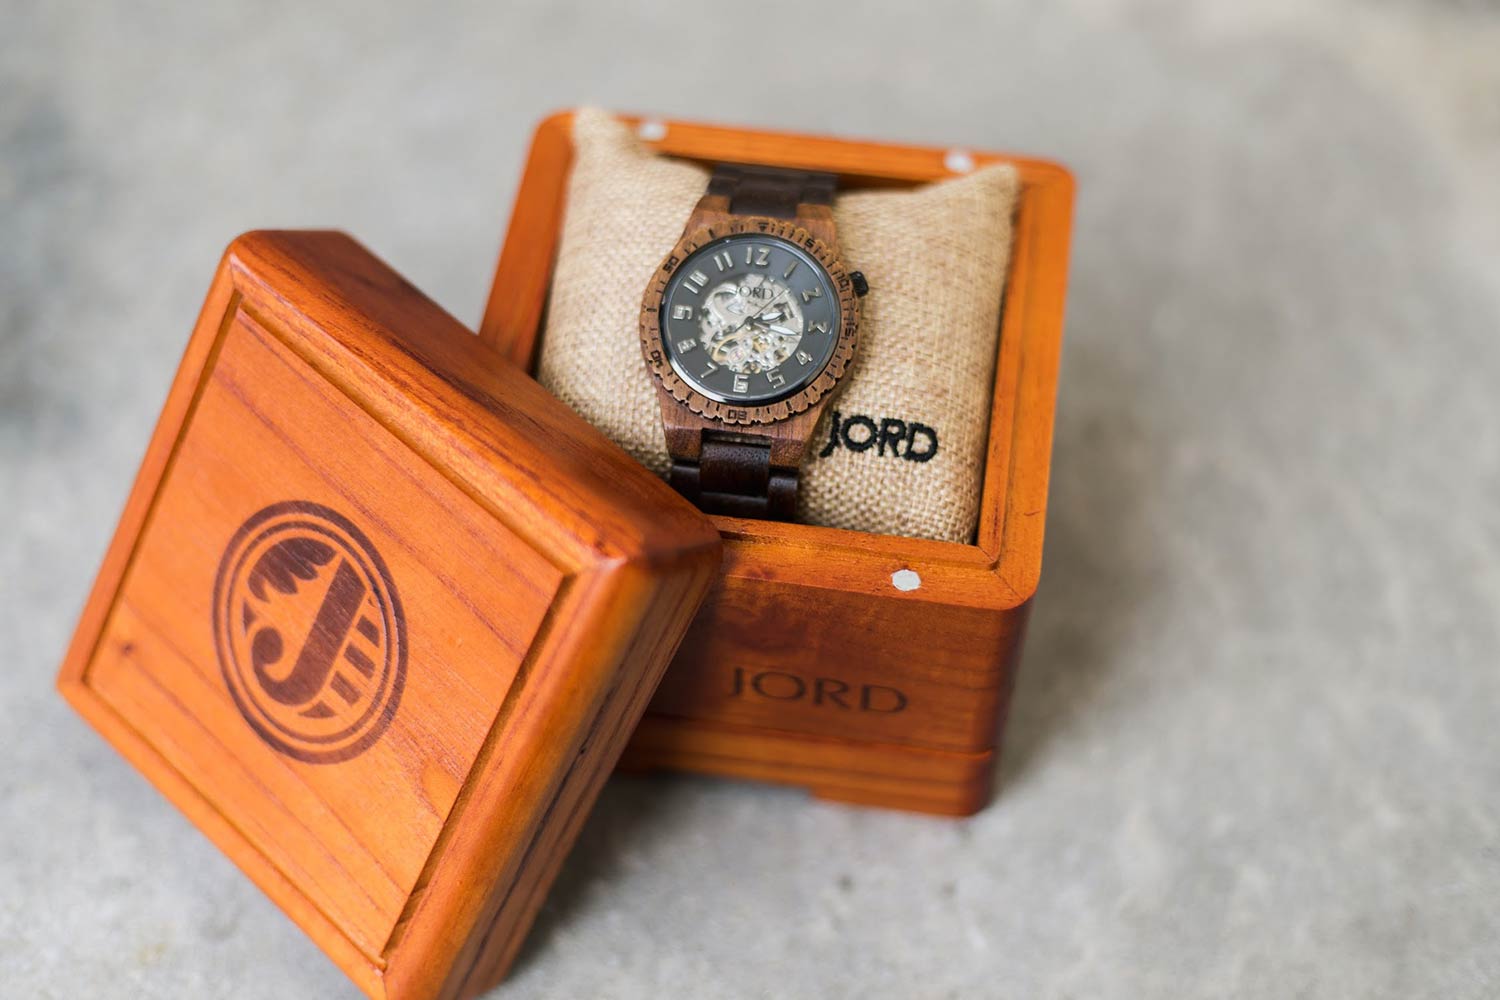 Jord Watches Dover Koa And Black Packaging | GENTLEMAN WITHIN